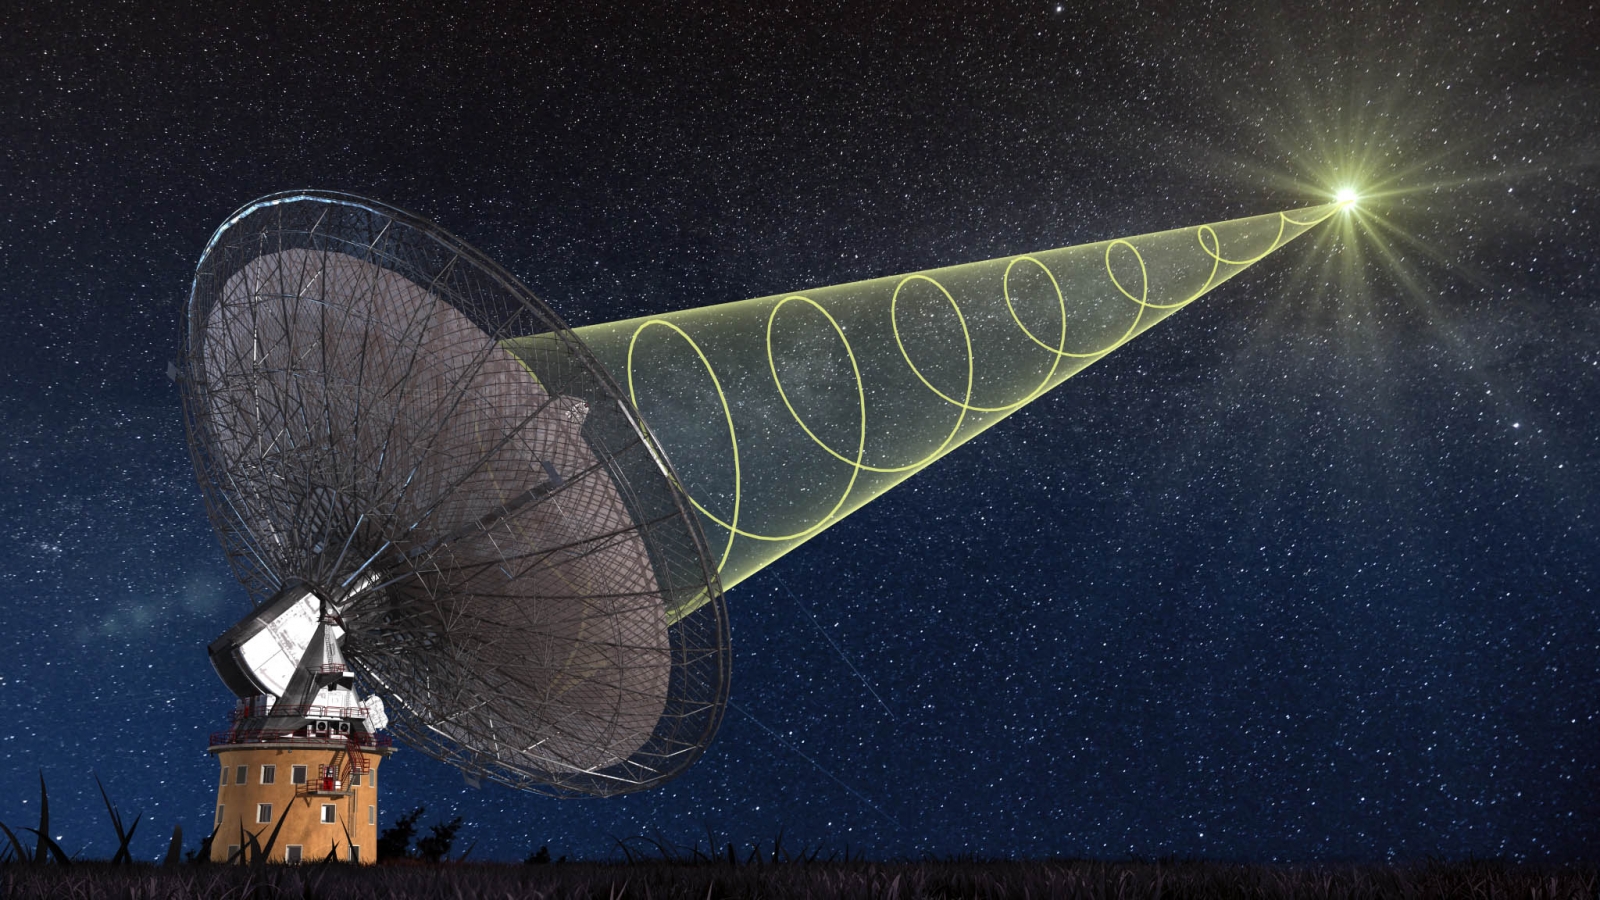 Mystery radio signals from space recorded live from 5.5 billion light